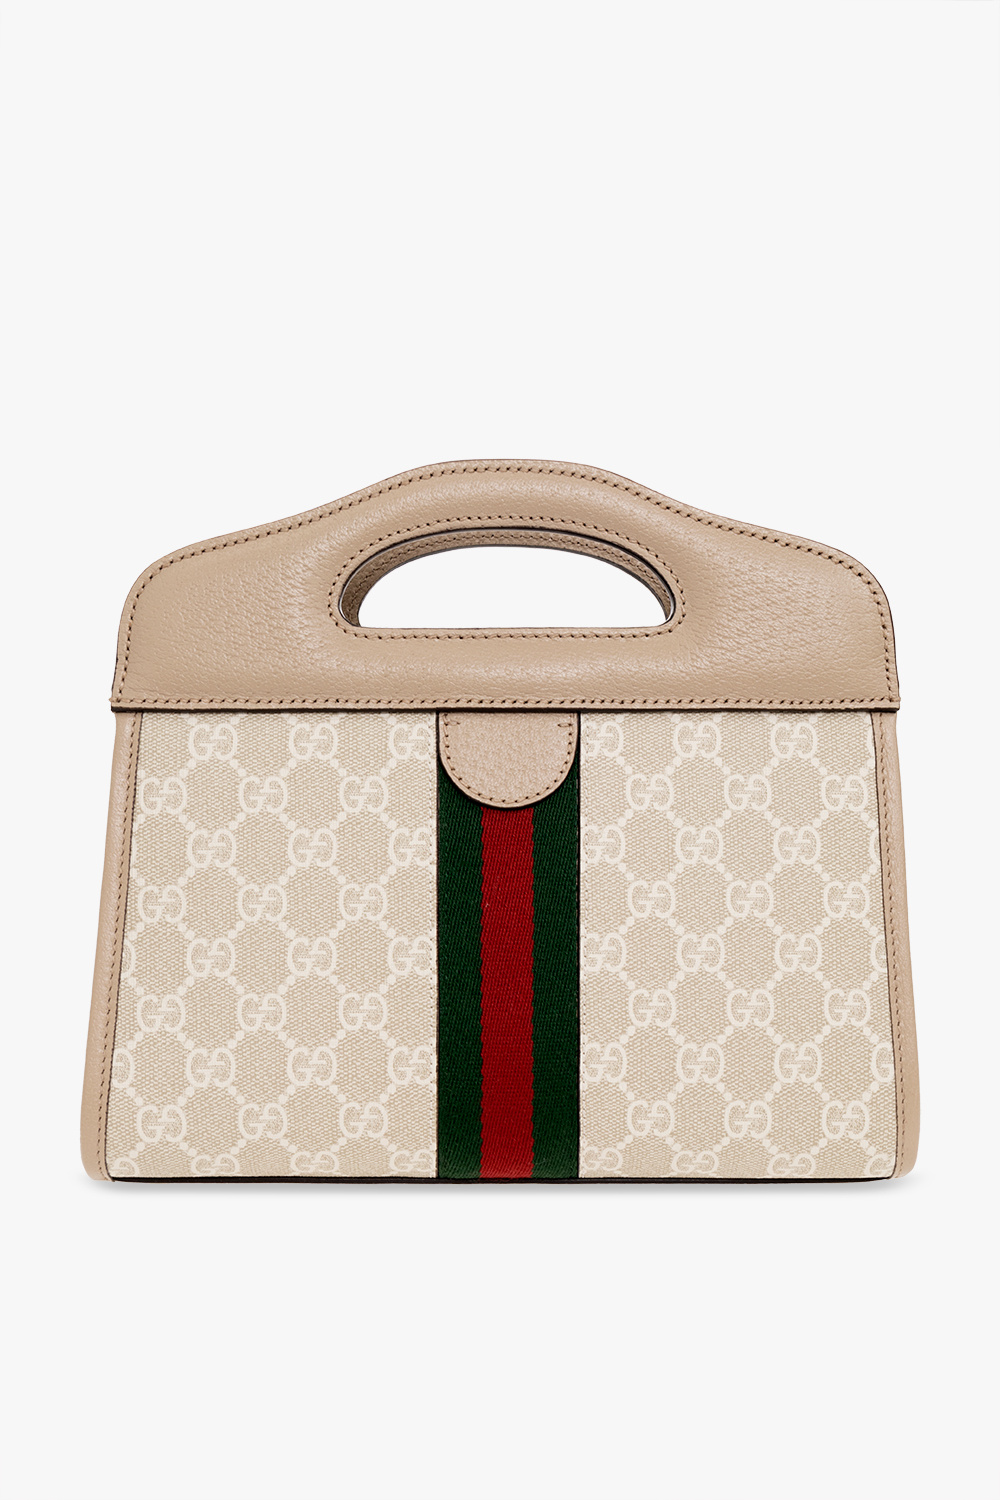 gucci adidas ‘Ophidia Small’ shoulder bag